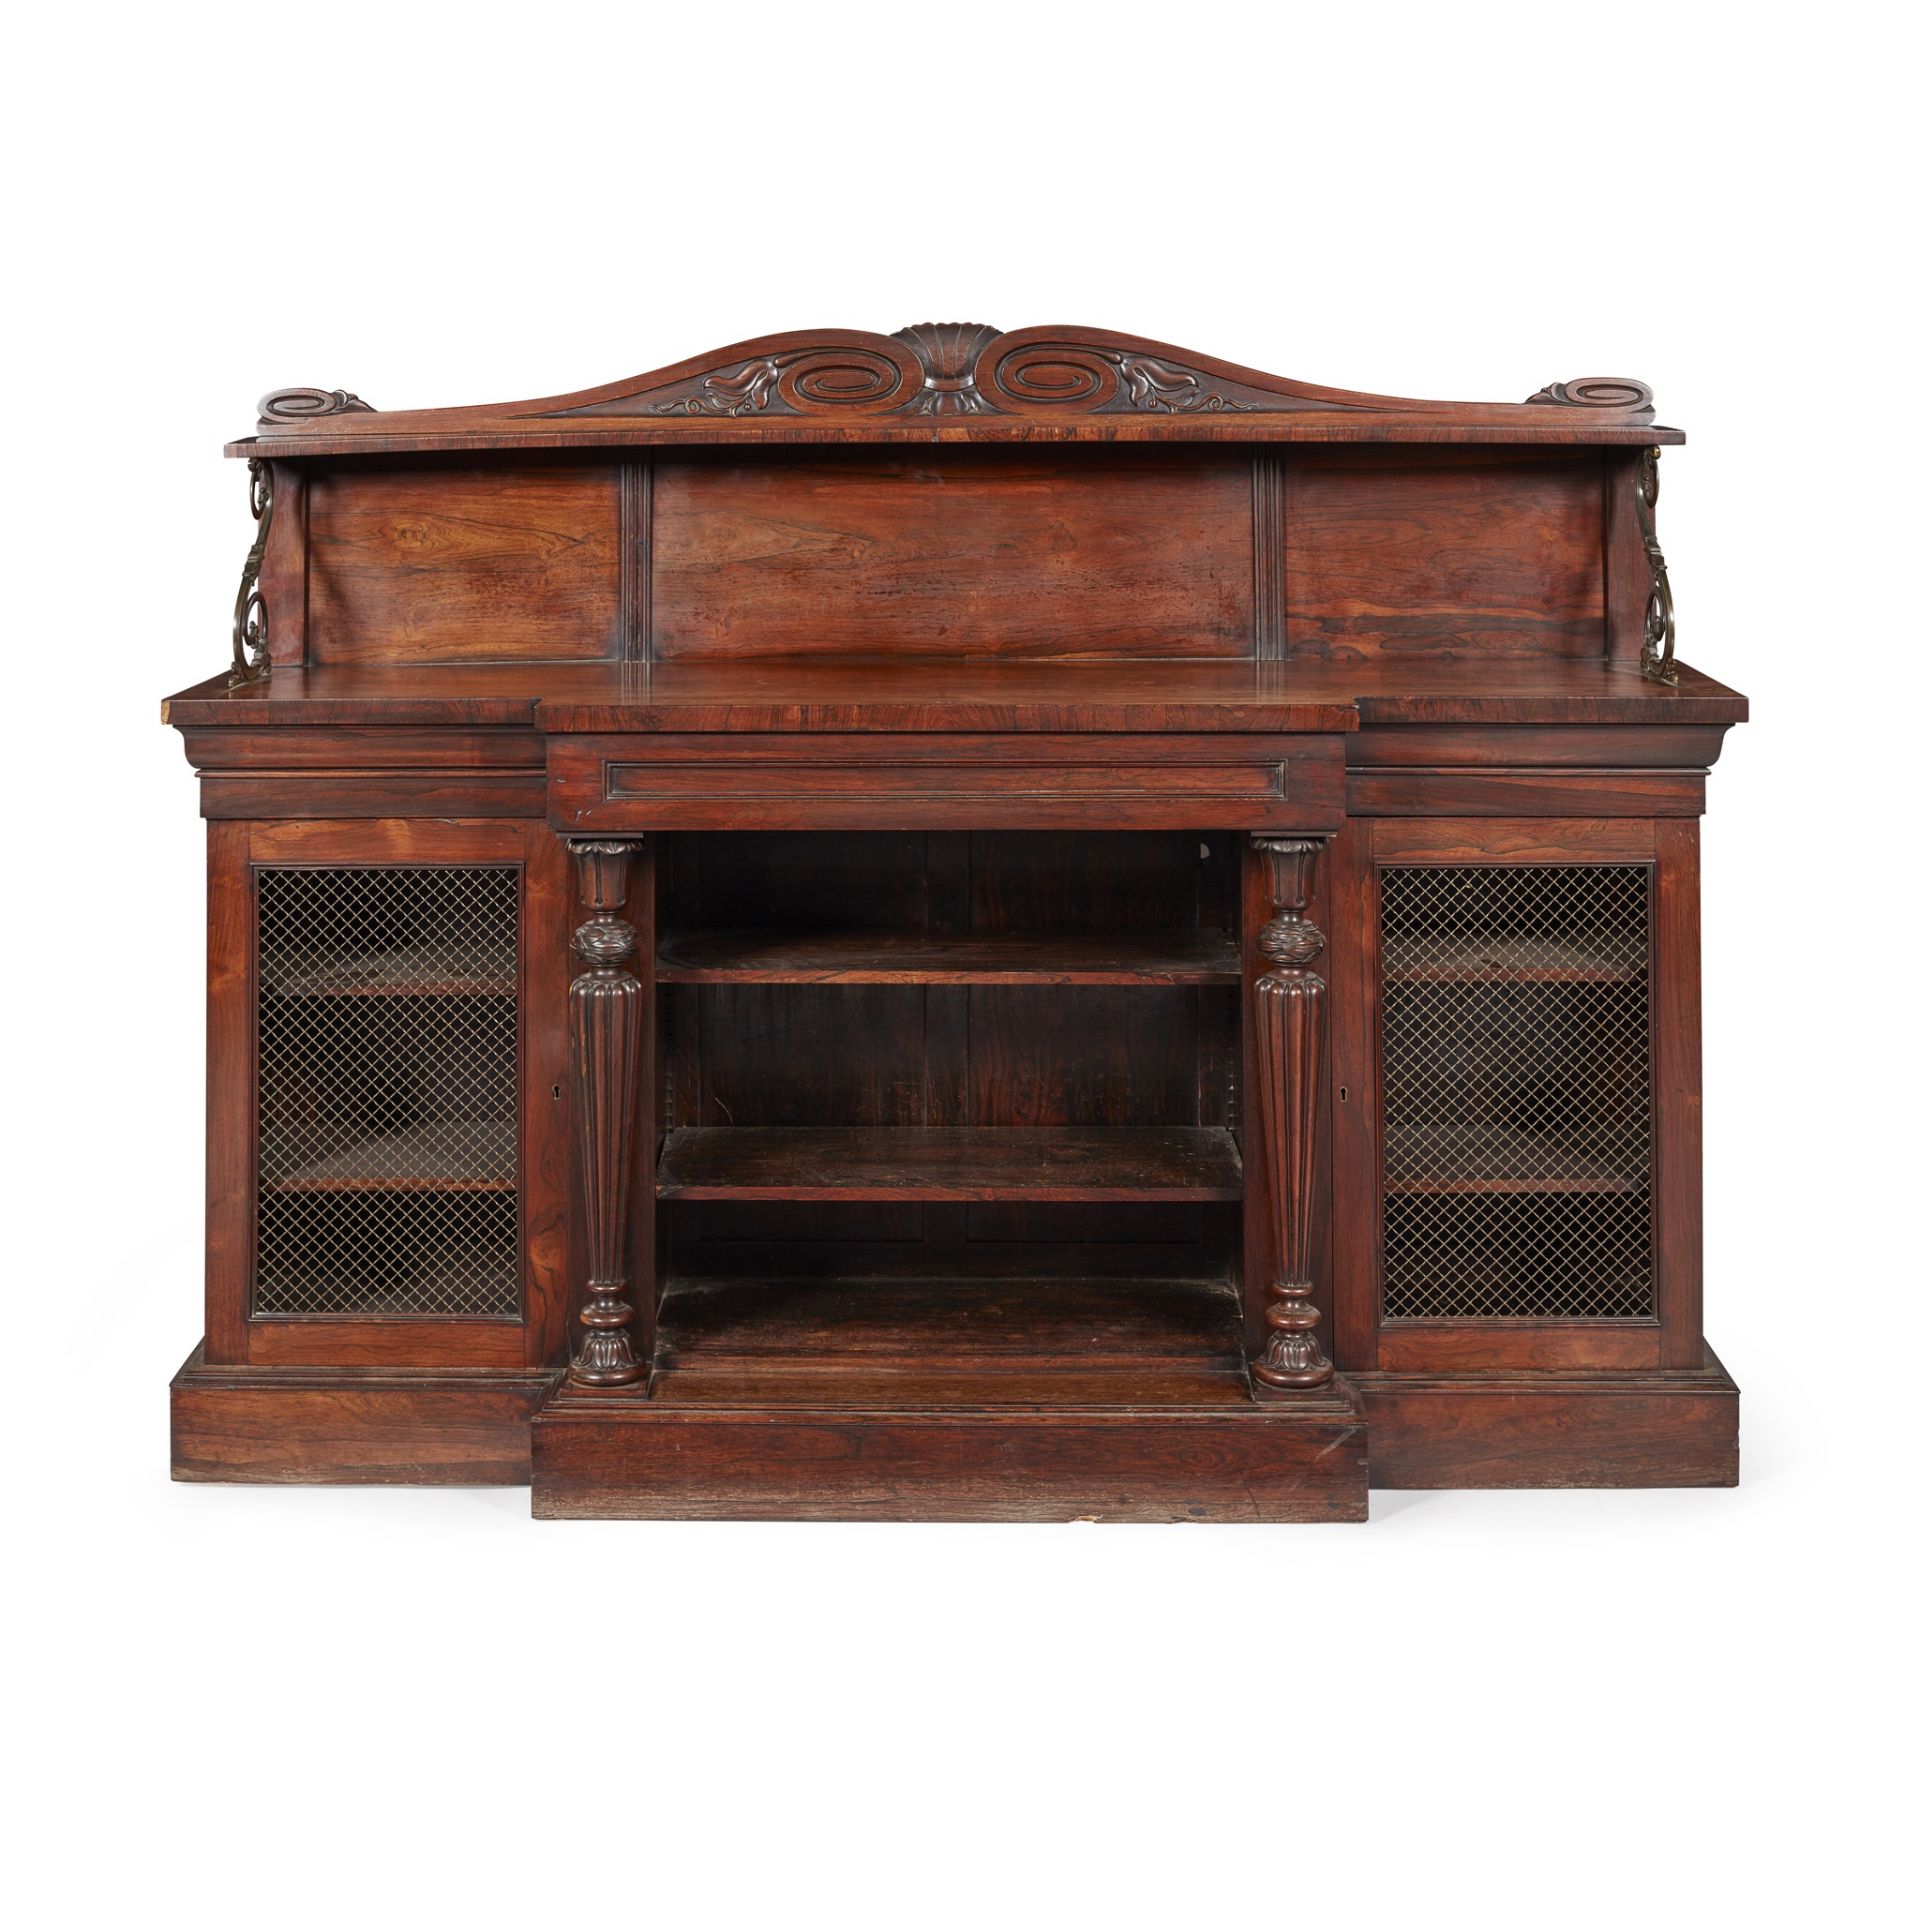 Y REGENCY ROSEWOOD AND BRASS OPEN BOOKCASE, IN THE MANNER OF GILLOWS EARLY 19TH CENTURY